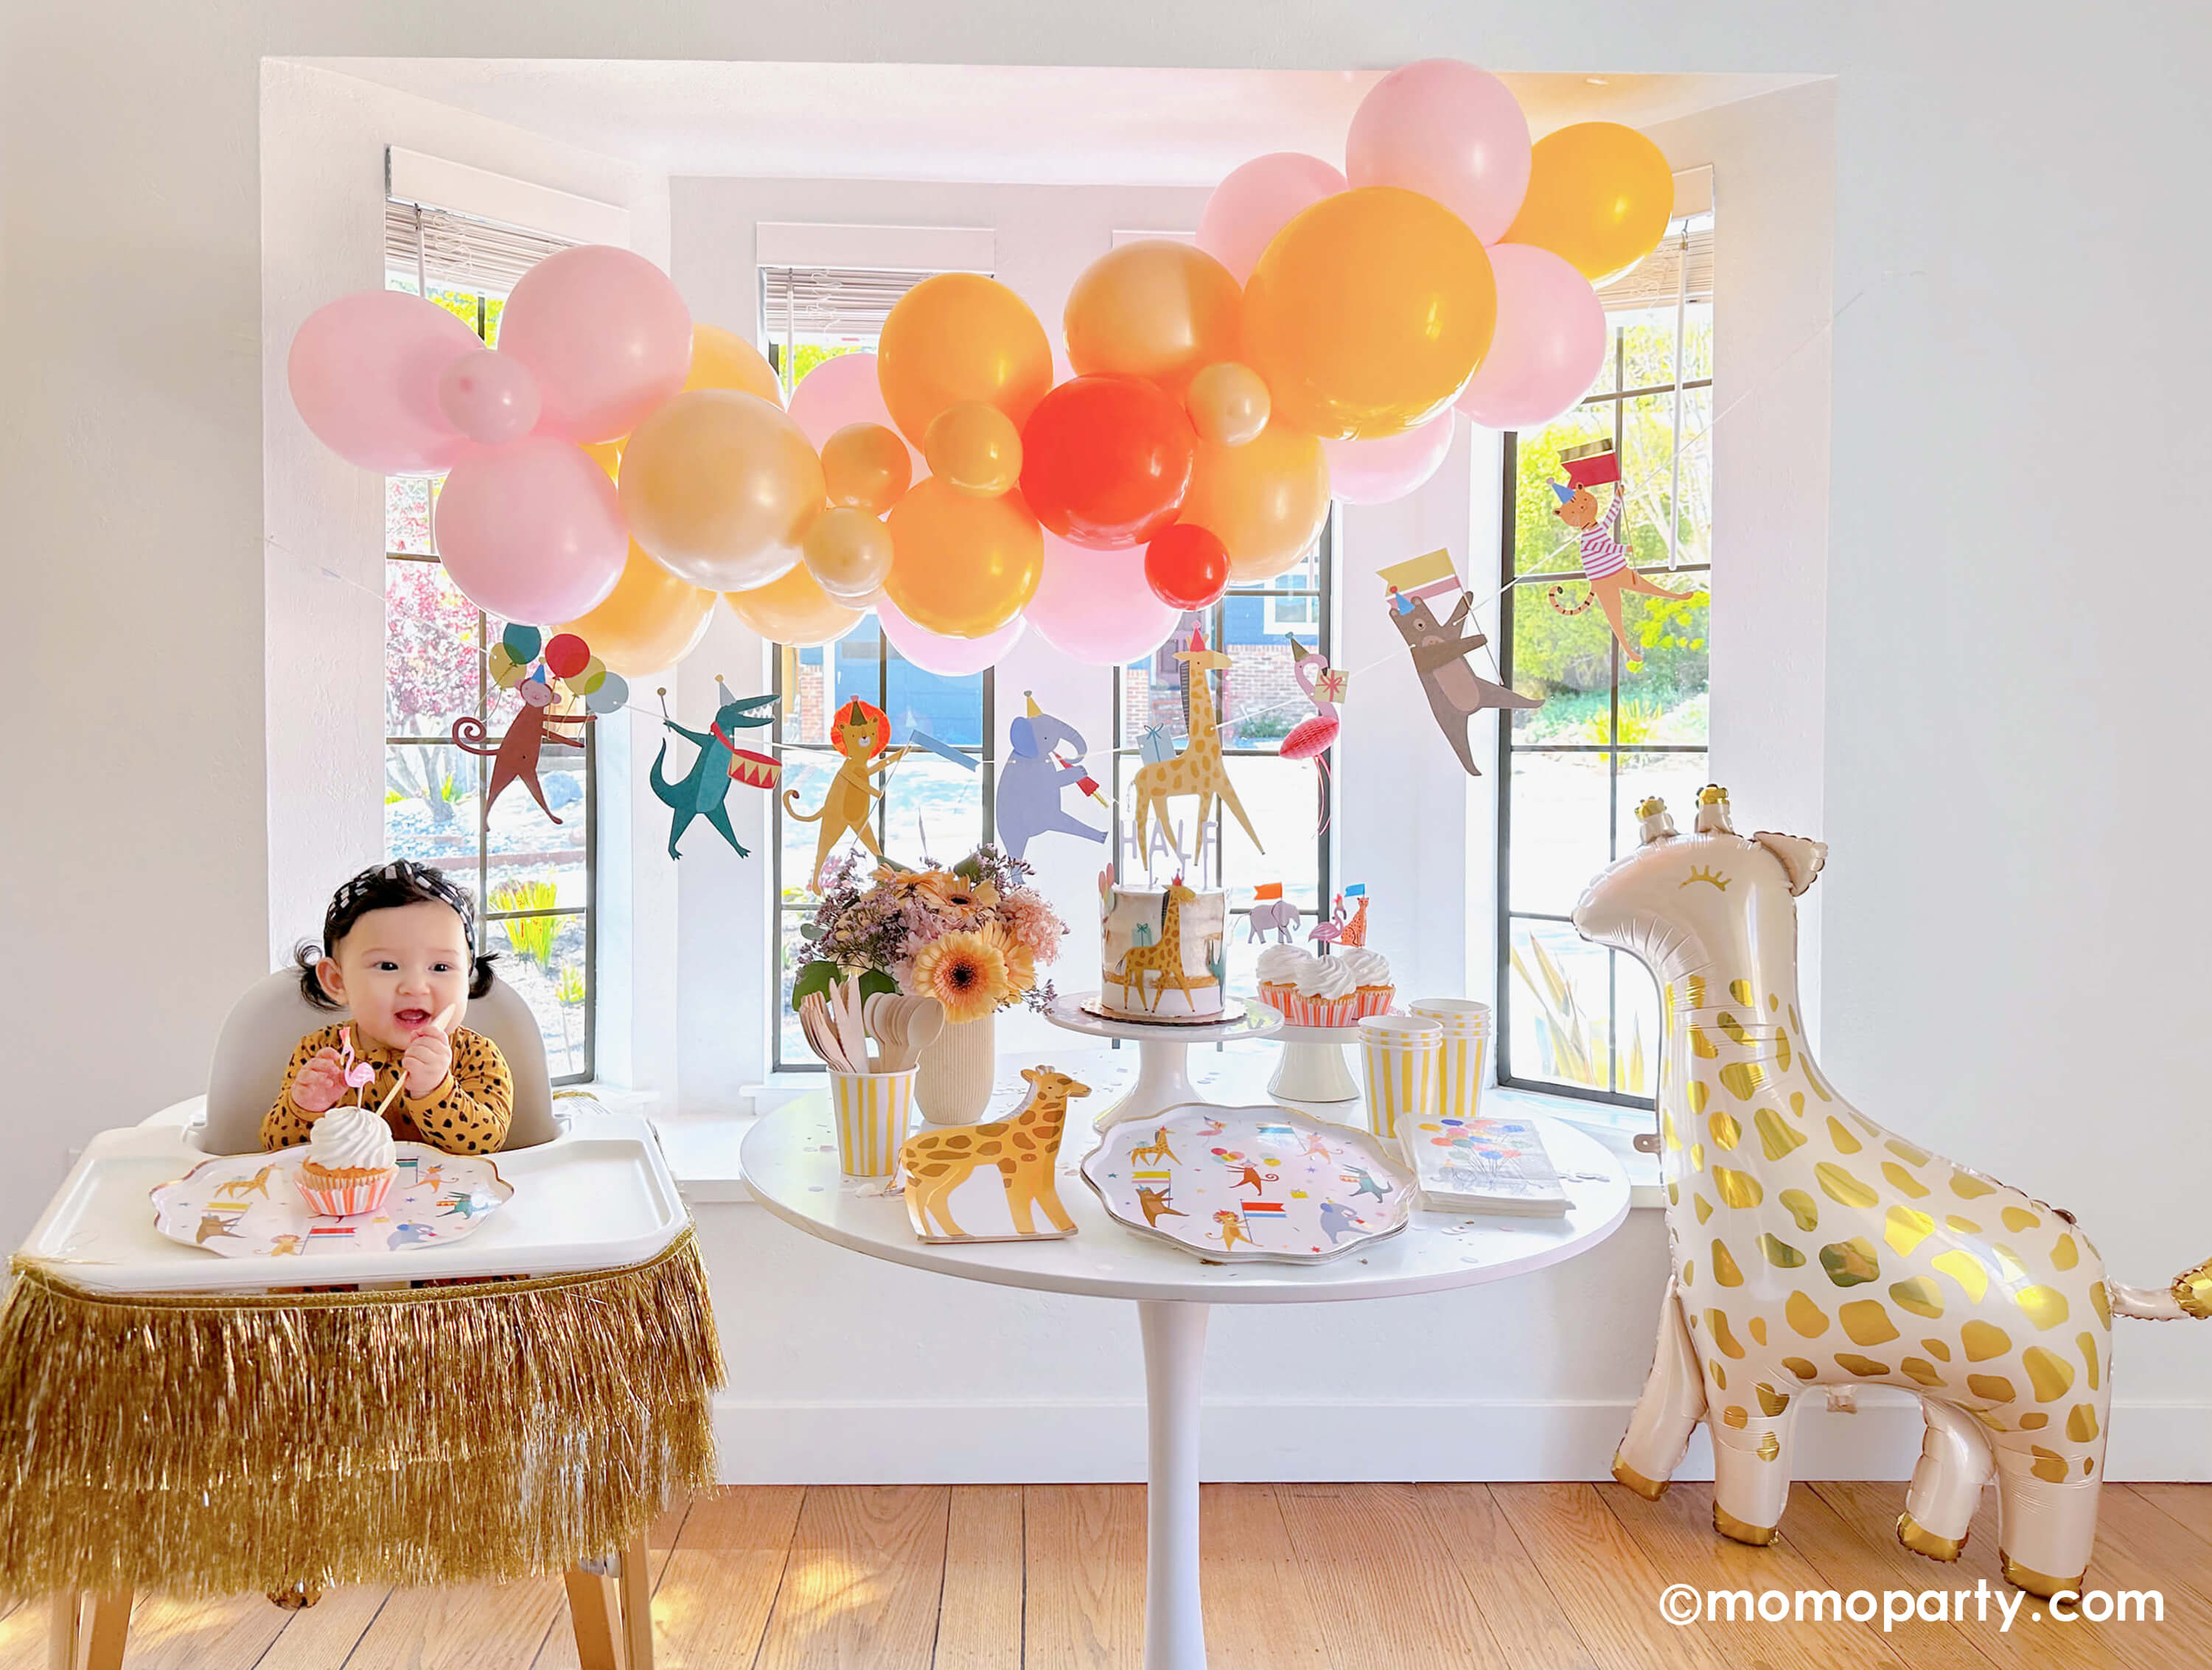 An adorable baby's animal themed 6 months party featuring Momo Party's animal parade birthday garland featuring a lion, an elephant, an alligator, a giraffe, along with a festive balloon garland in a warm color tone hanging above. On the dessert table, there are Meri Meri's animal parade dinner plates, giraffe shaped plates and cupcakes dressed with the safari animal toppers, next to the table there's a giraffe shaped foil balloon. One the left a highchair is decorated with a gold tinsel garland.